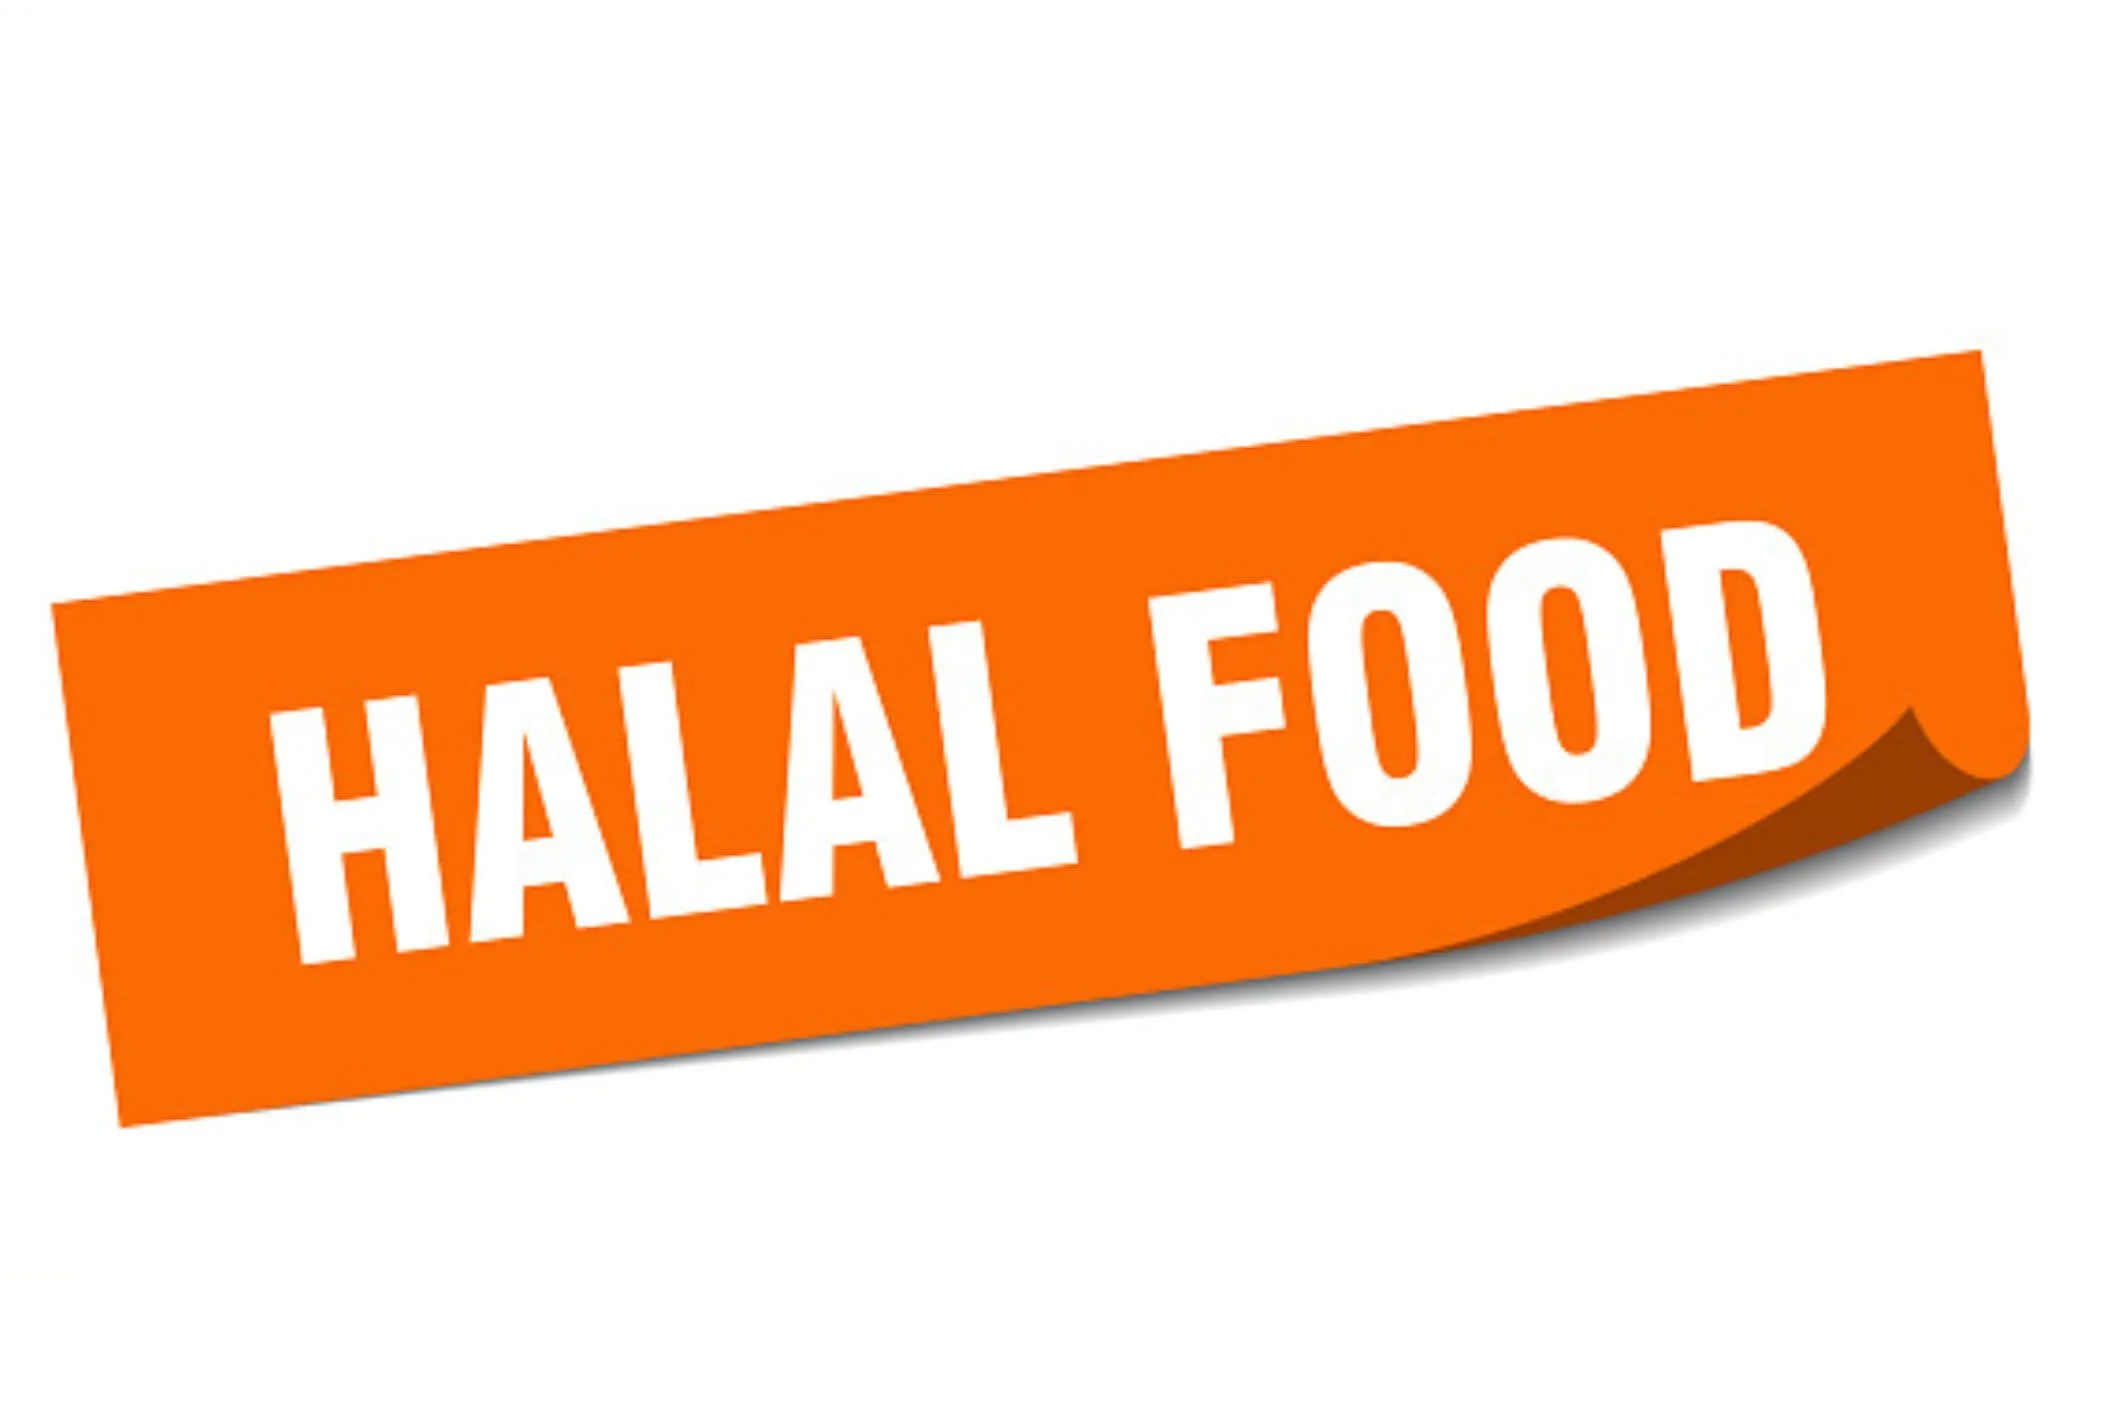 US halal food market to expand USD 9.33 billion from 2021 to 2026